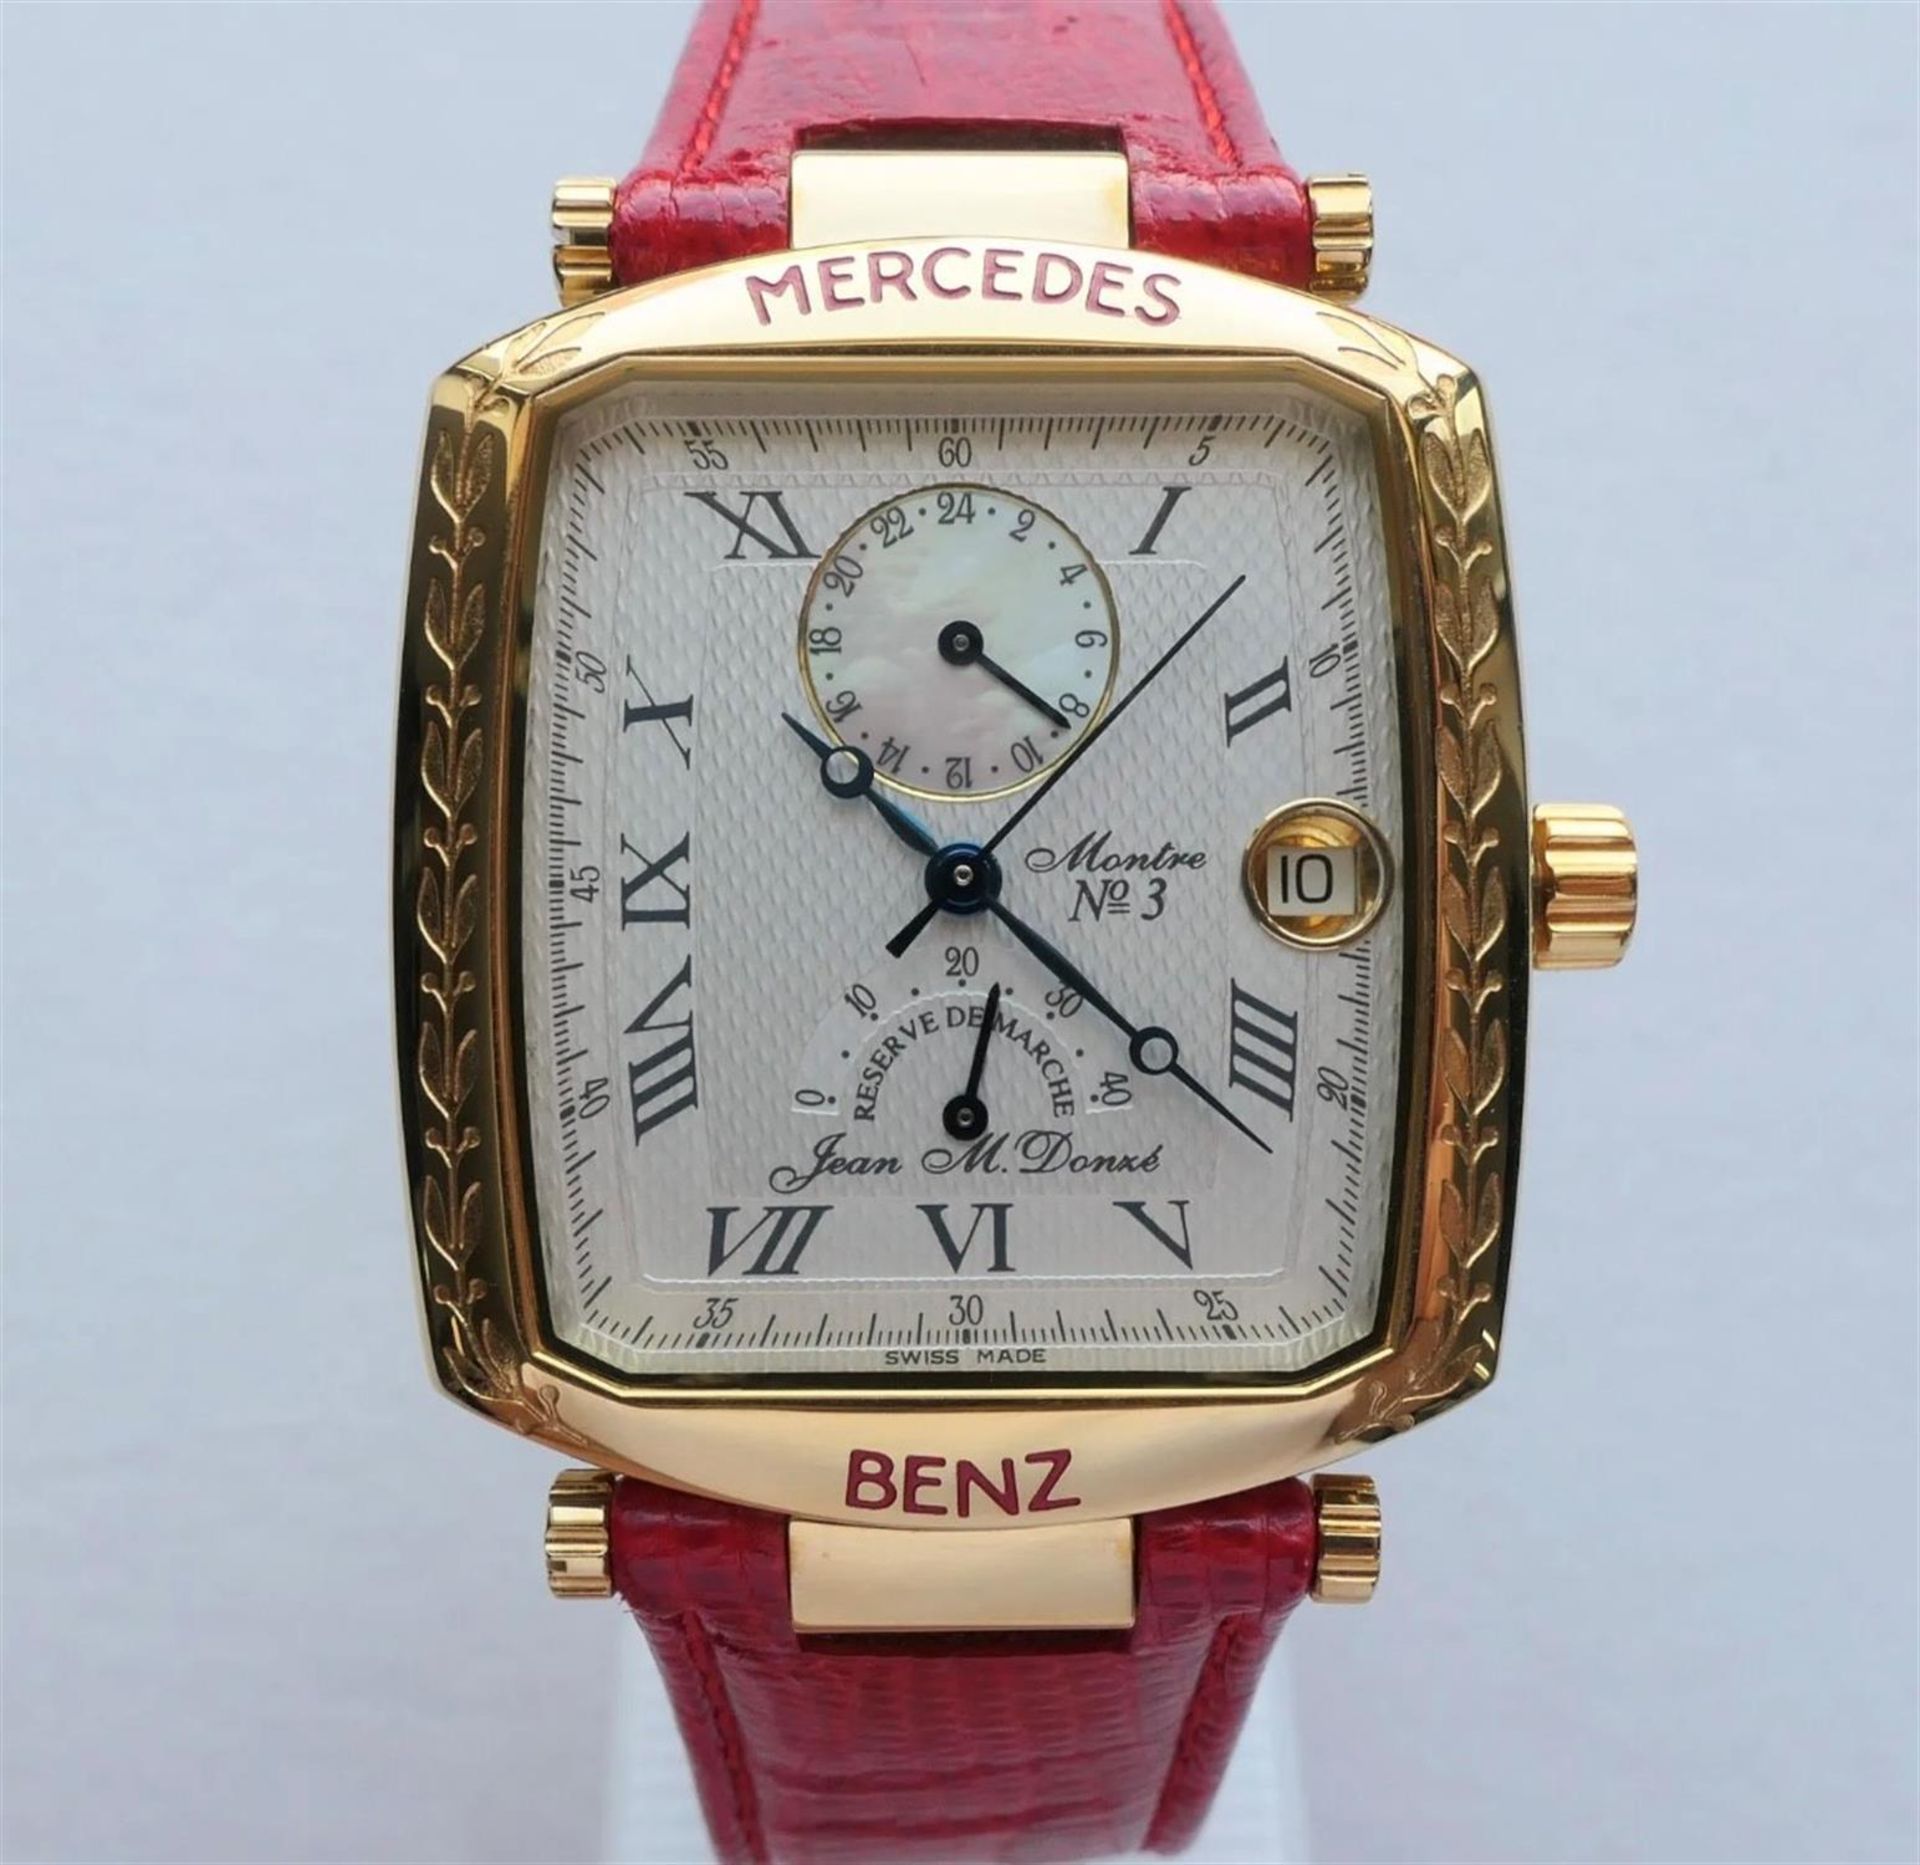 A 18ct Gold-Plated Mercedes-Benz Swiss-Made Automatic Wrist Watch